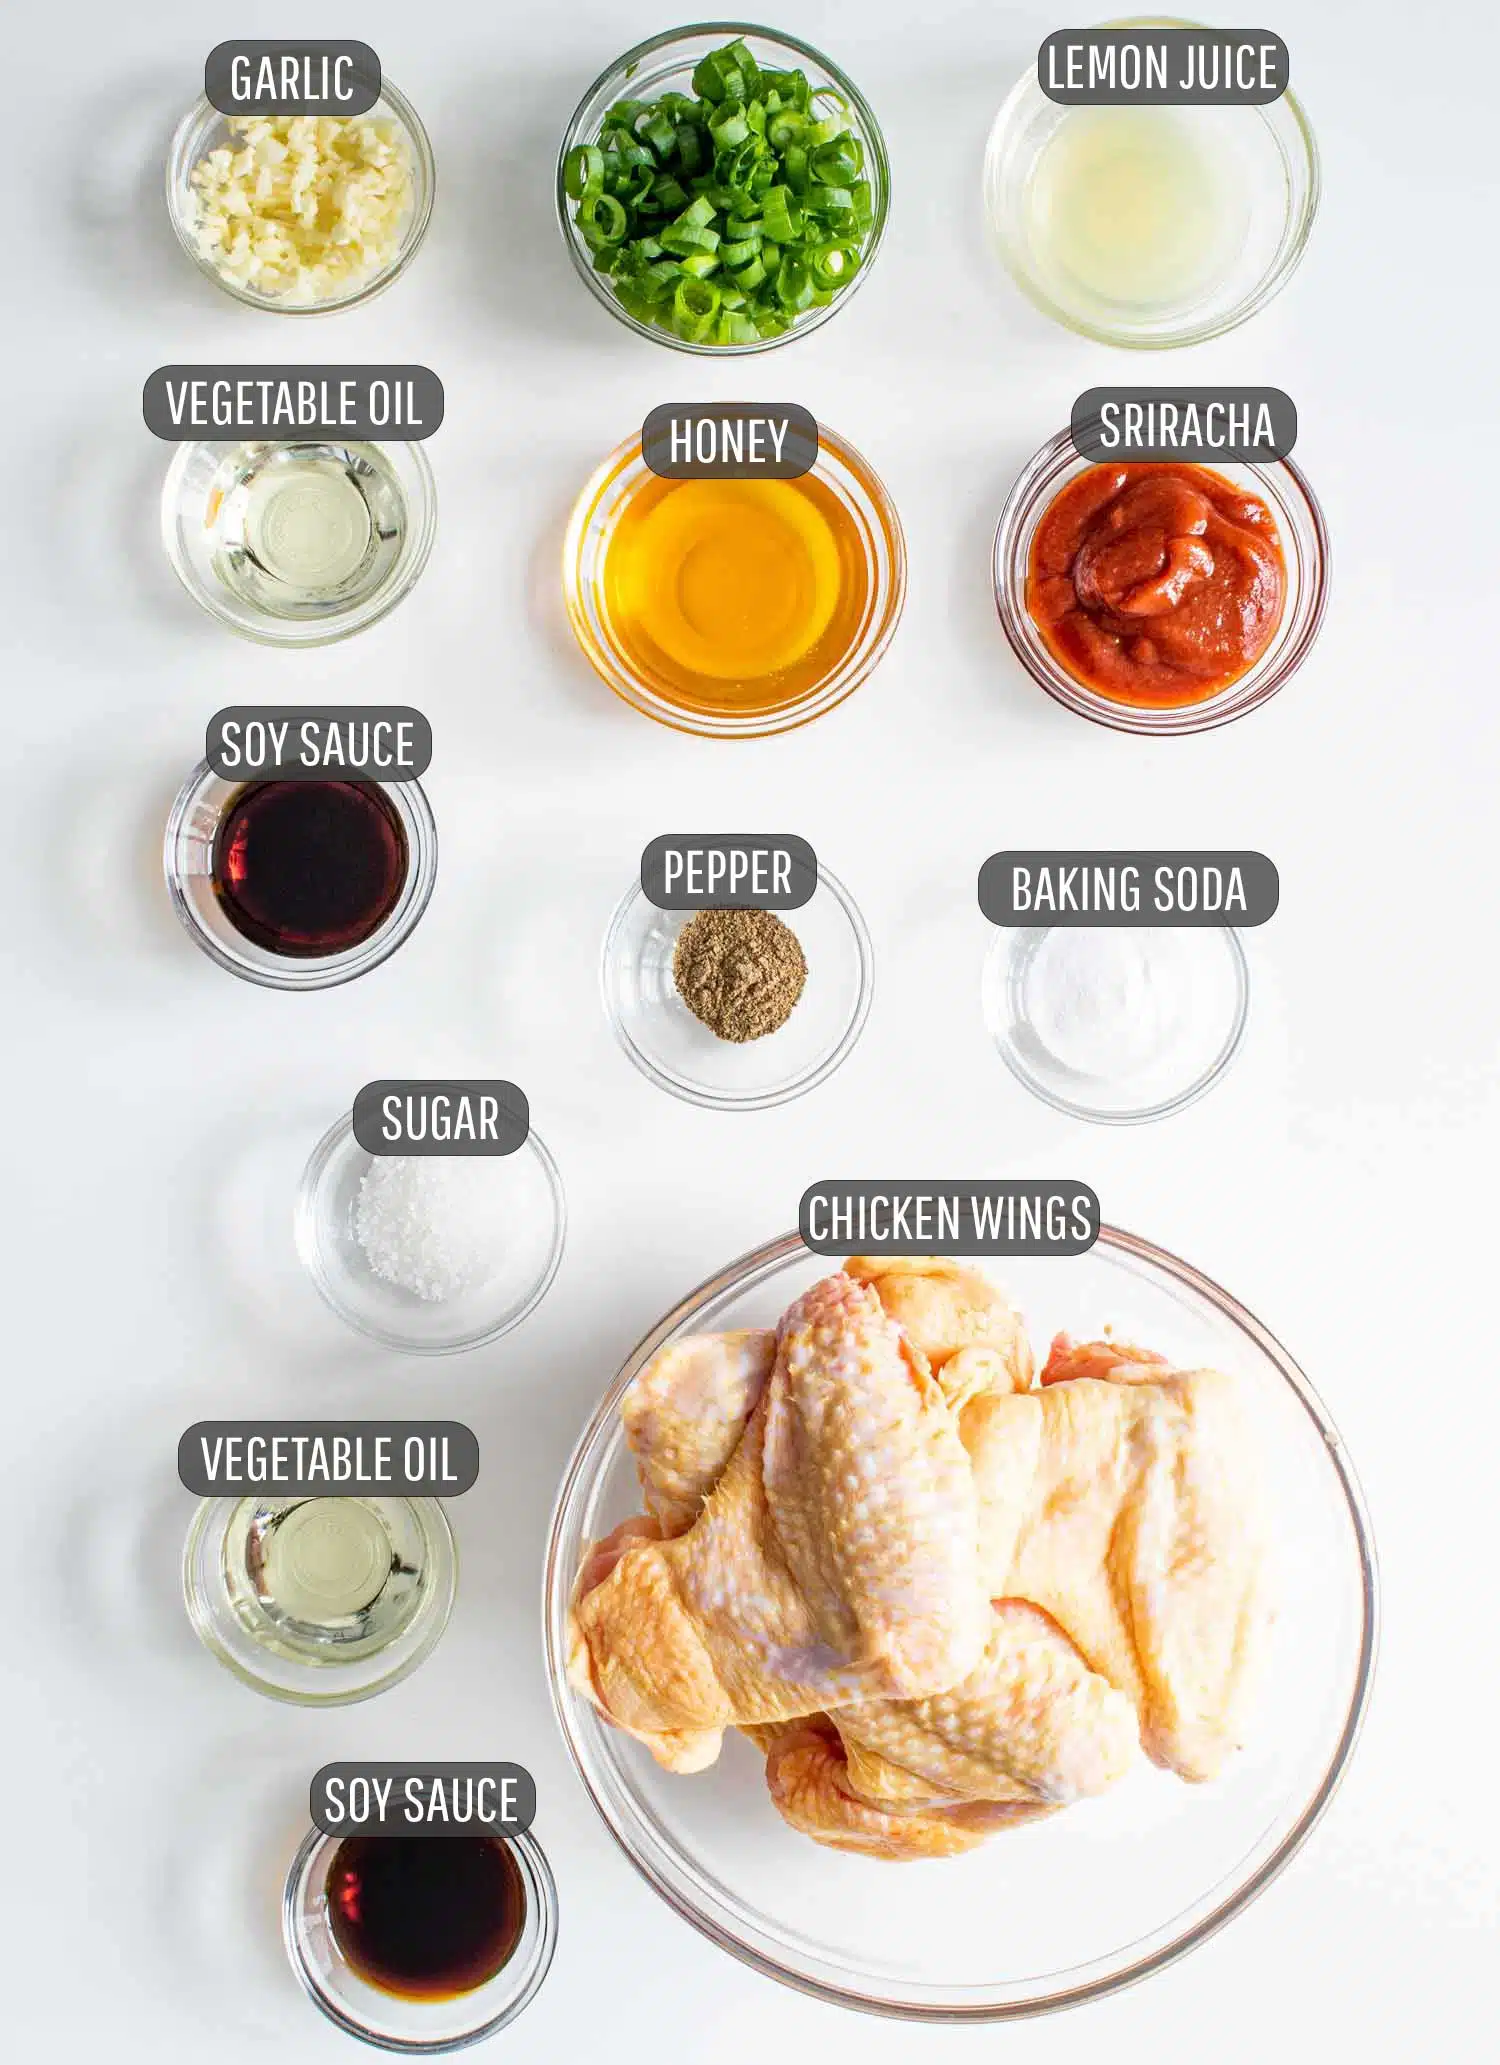 ingredients needed to make thai chicken wings.